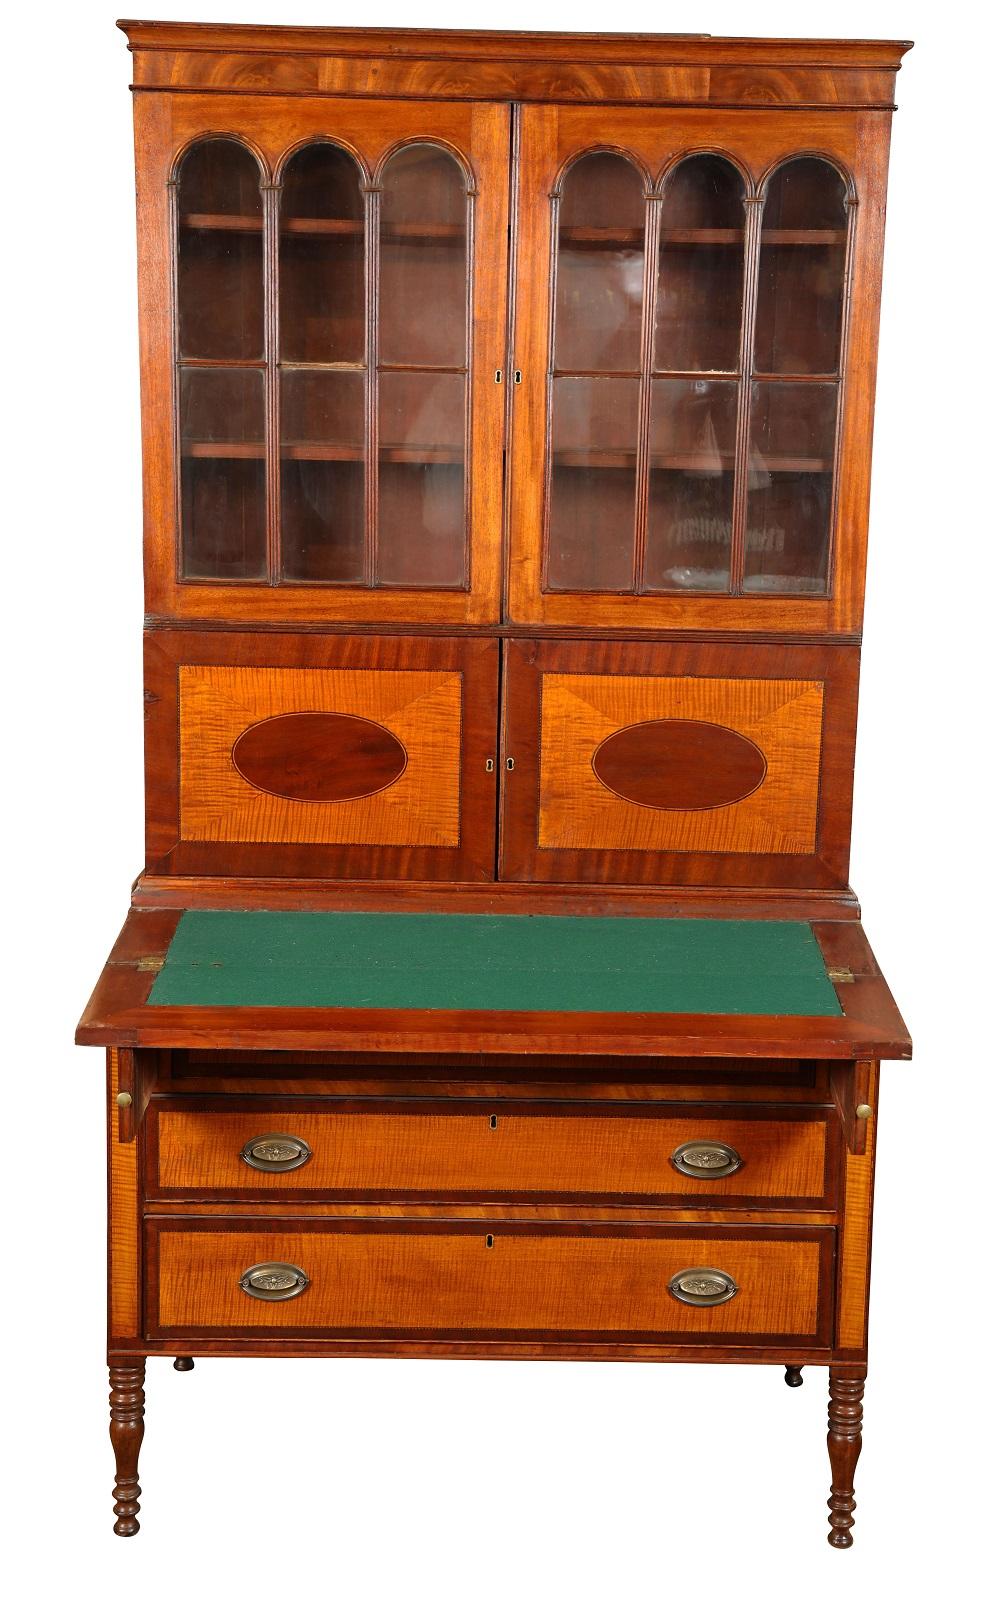 Early 19th century American Sheraton two part secretary of mahogany and tiger maple from coastal new England. Brasses replaced and a few age appropriate cracks. Most panels are original glass, circa 1800-1815.